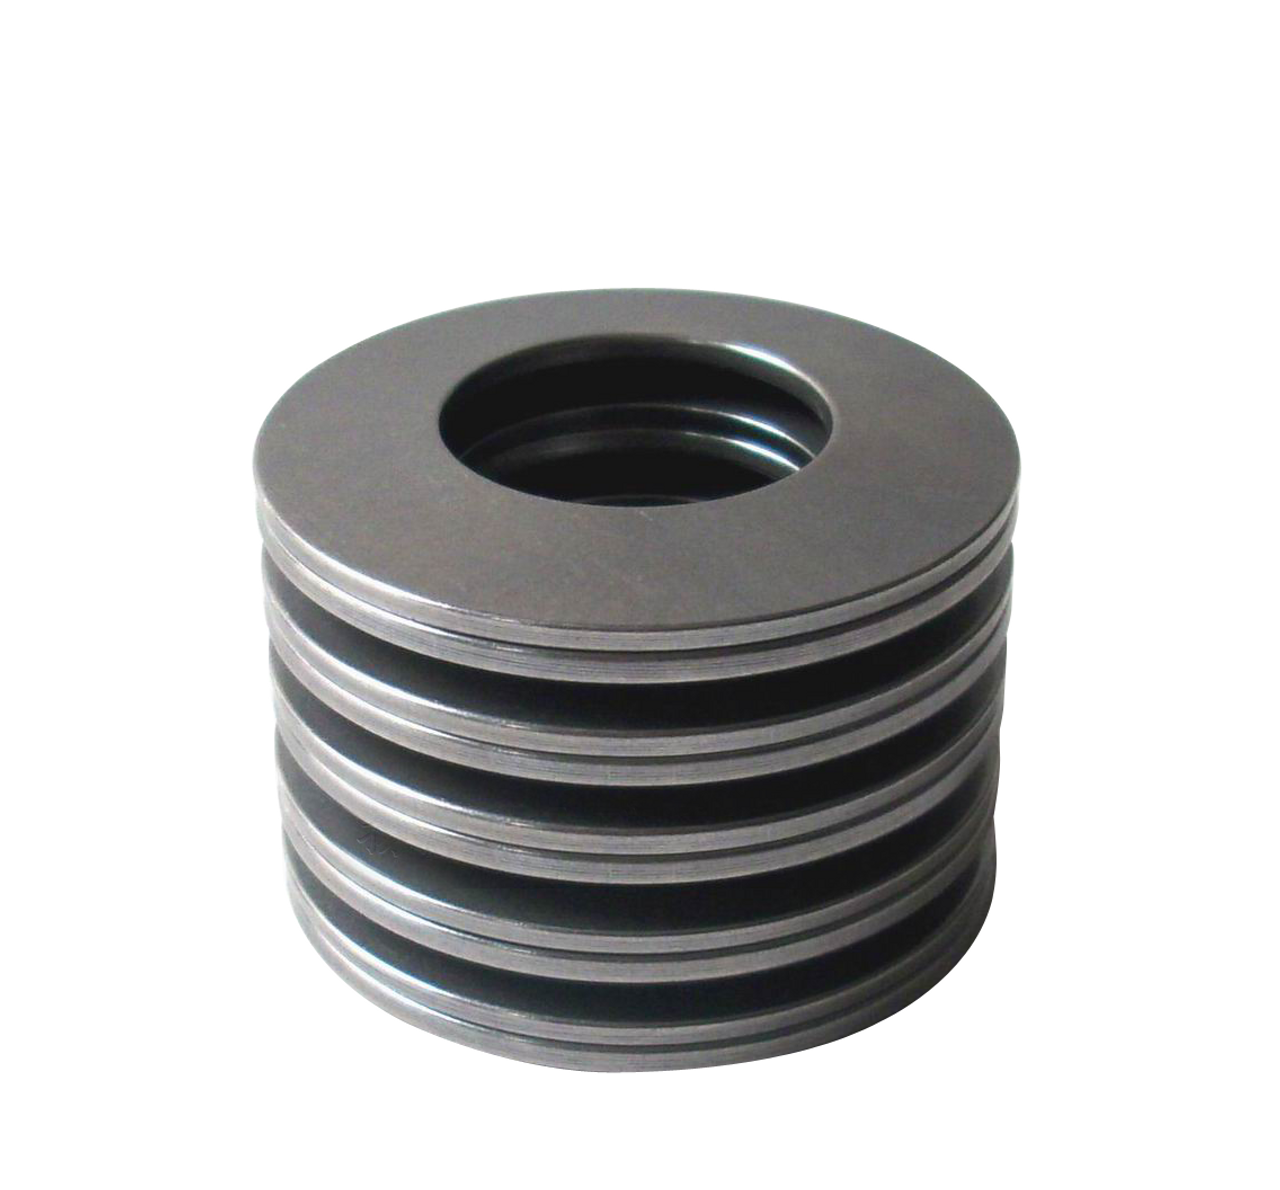 25mm Disc Spring (DIN 2093) Conical Washer  DS025.5-070-02